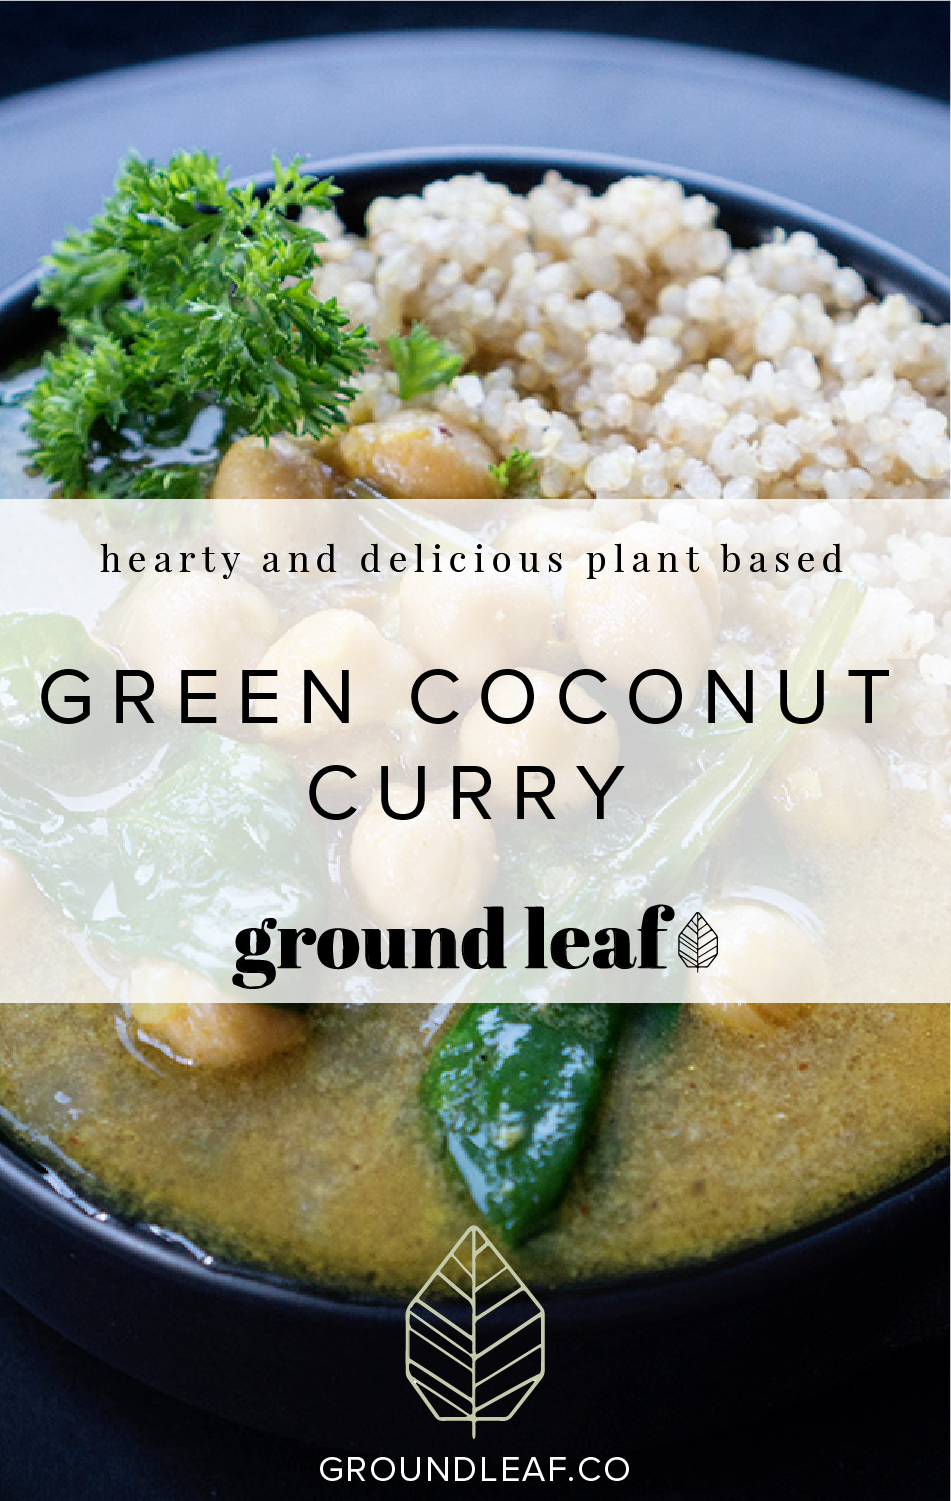 Recipe for how to make a delicious green coconut curry in the instant pot. | Groundleaf.co